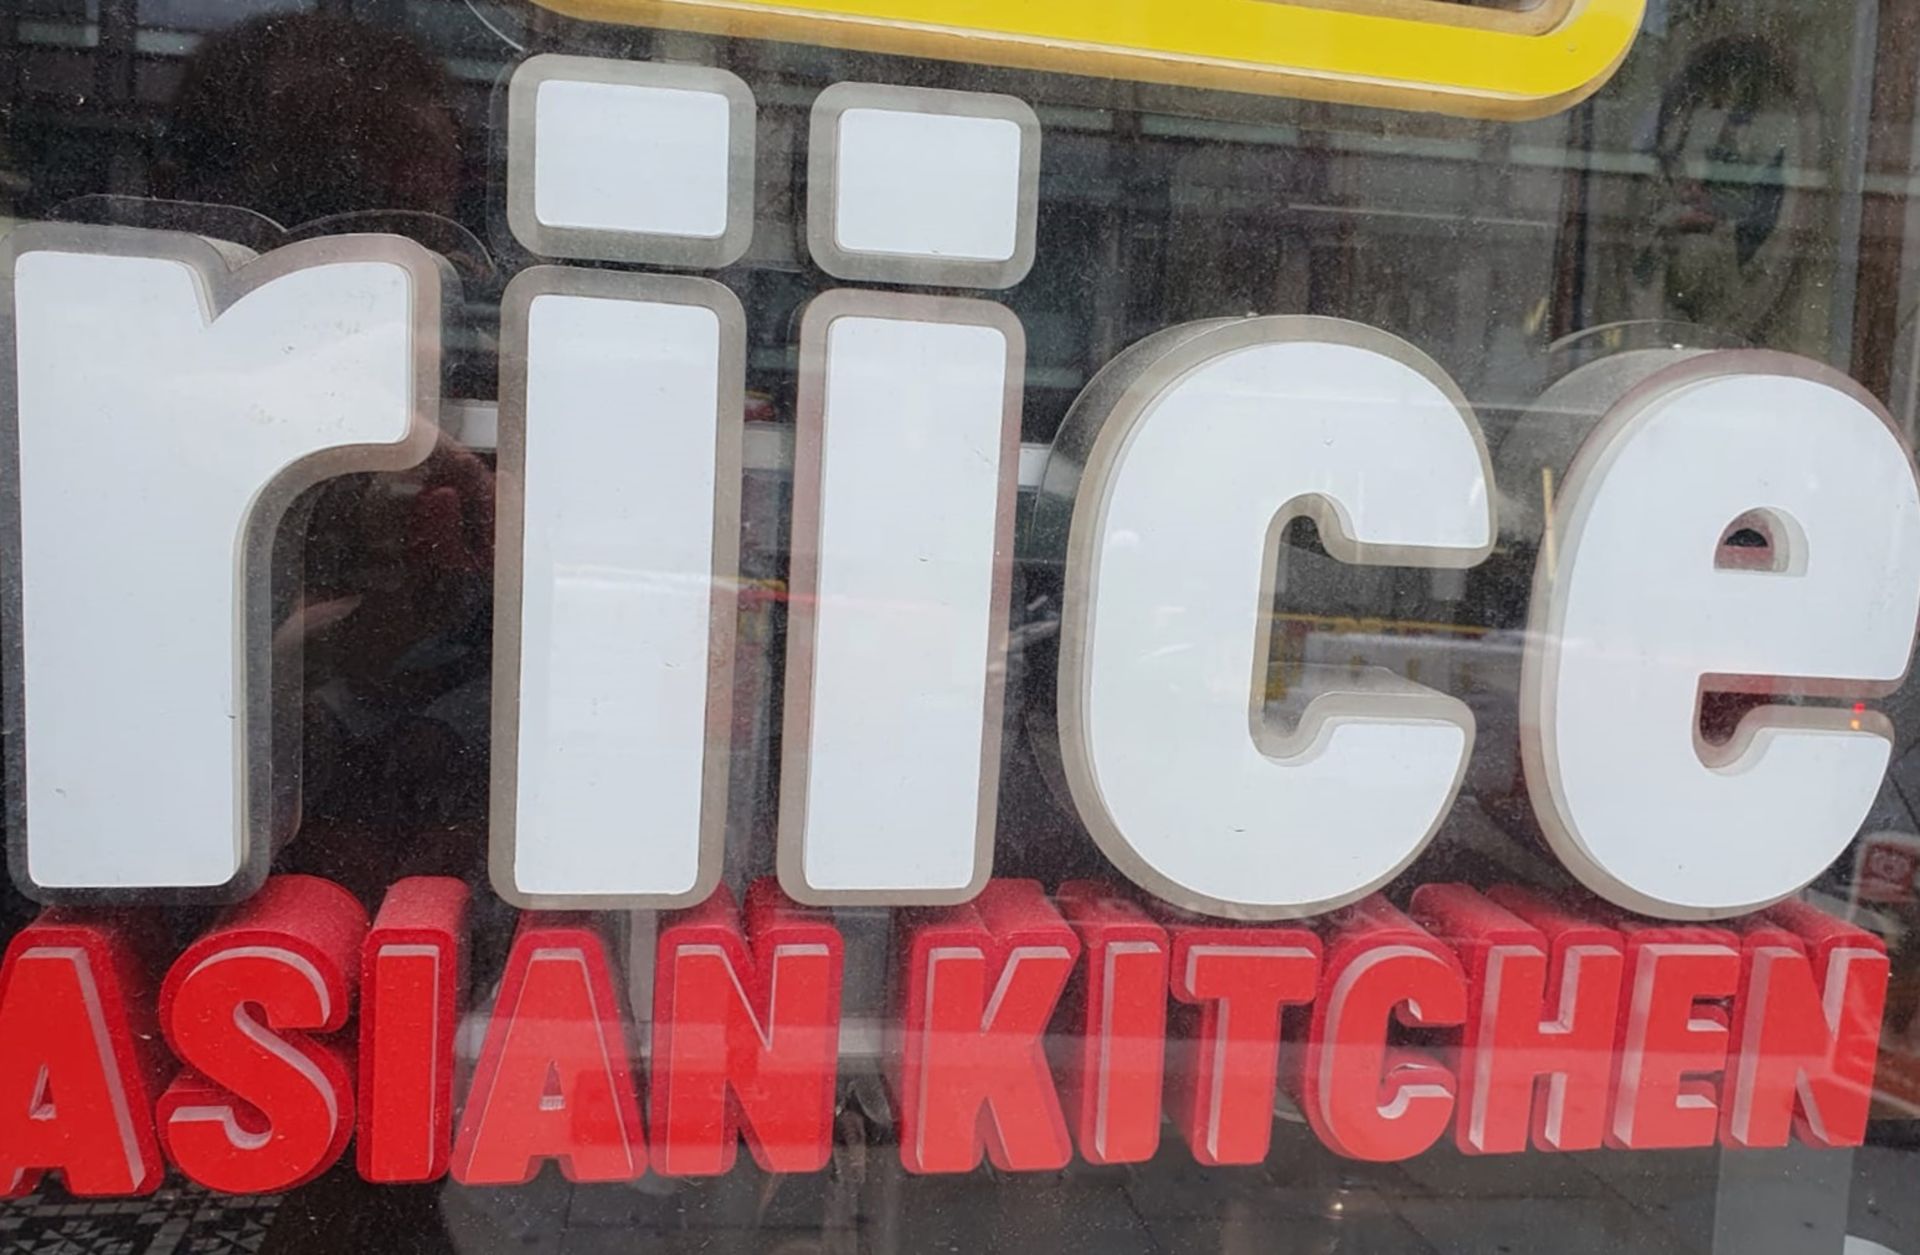 1 x Illuminated Window Sign With Transformer - Riice Asian Kitchen With Logo - Size H110 x W88 x - Image 7 of 8